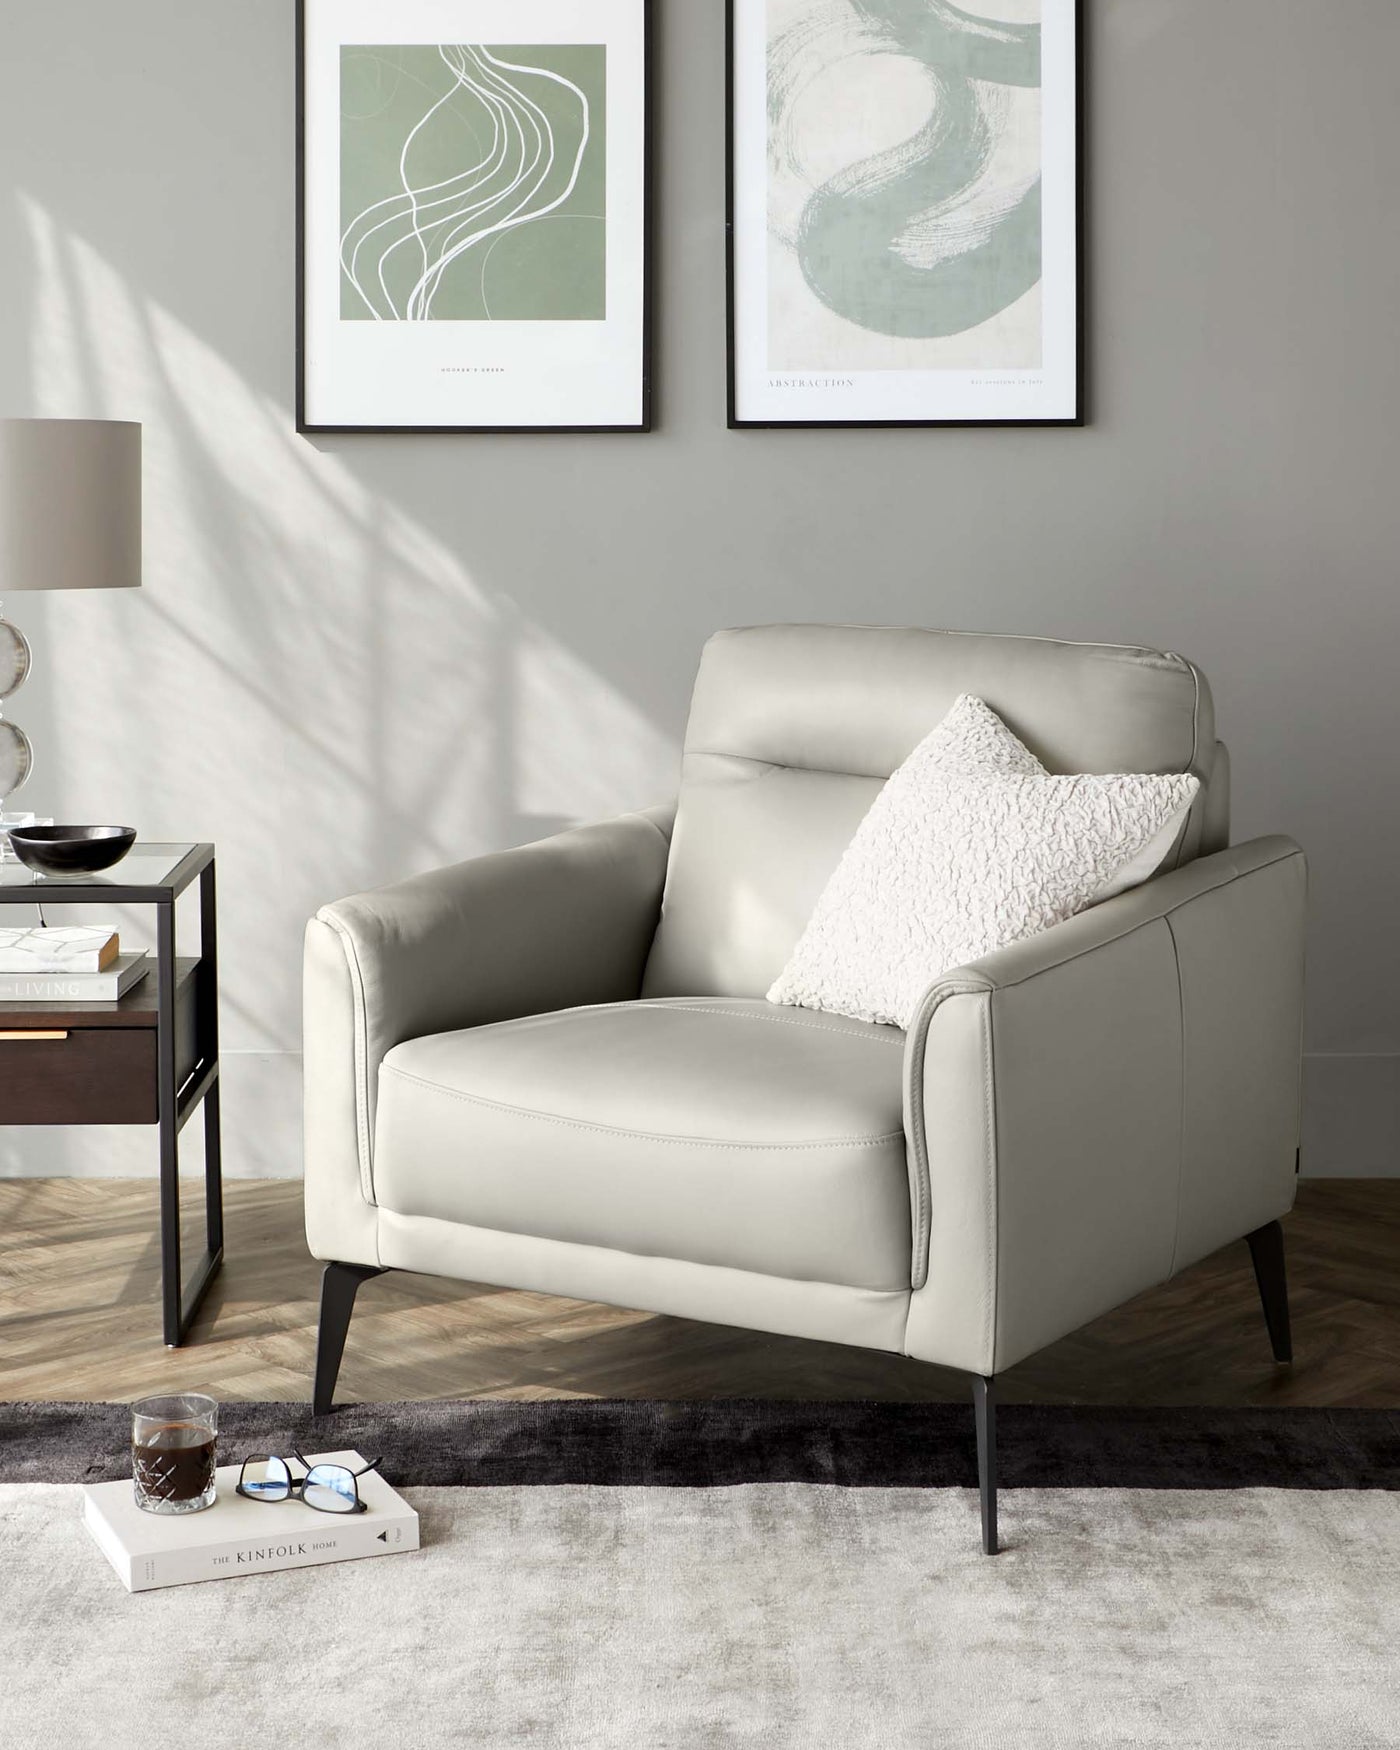 Elegant light grey leather armchair with a modern silhouette, featuring clean lines, a cushioned seat, a comfortable backrest, and a fluffy white throw pillow. The chair has slender black metal legs and is placed beside a contemporary style side table with a round black top and a lower wooden shelf, accessorized with decorative items. The setup is on a plush dual-tone grey area rug over a hardwood floor, with abstract wall art in the backdrop.